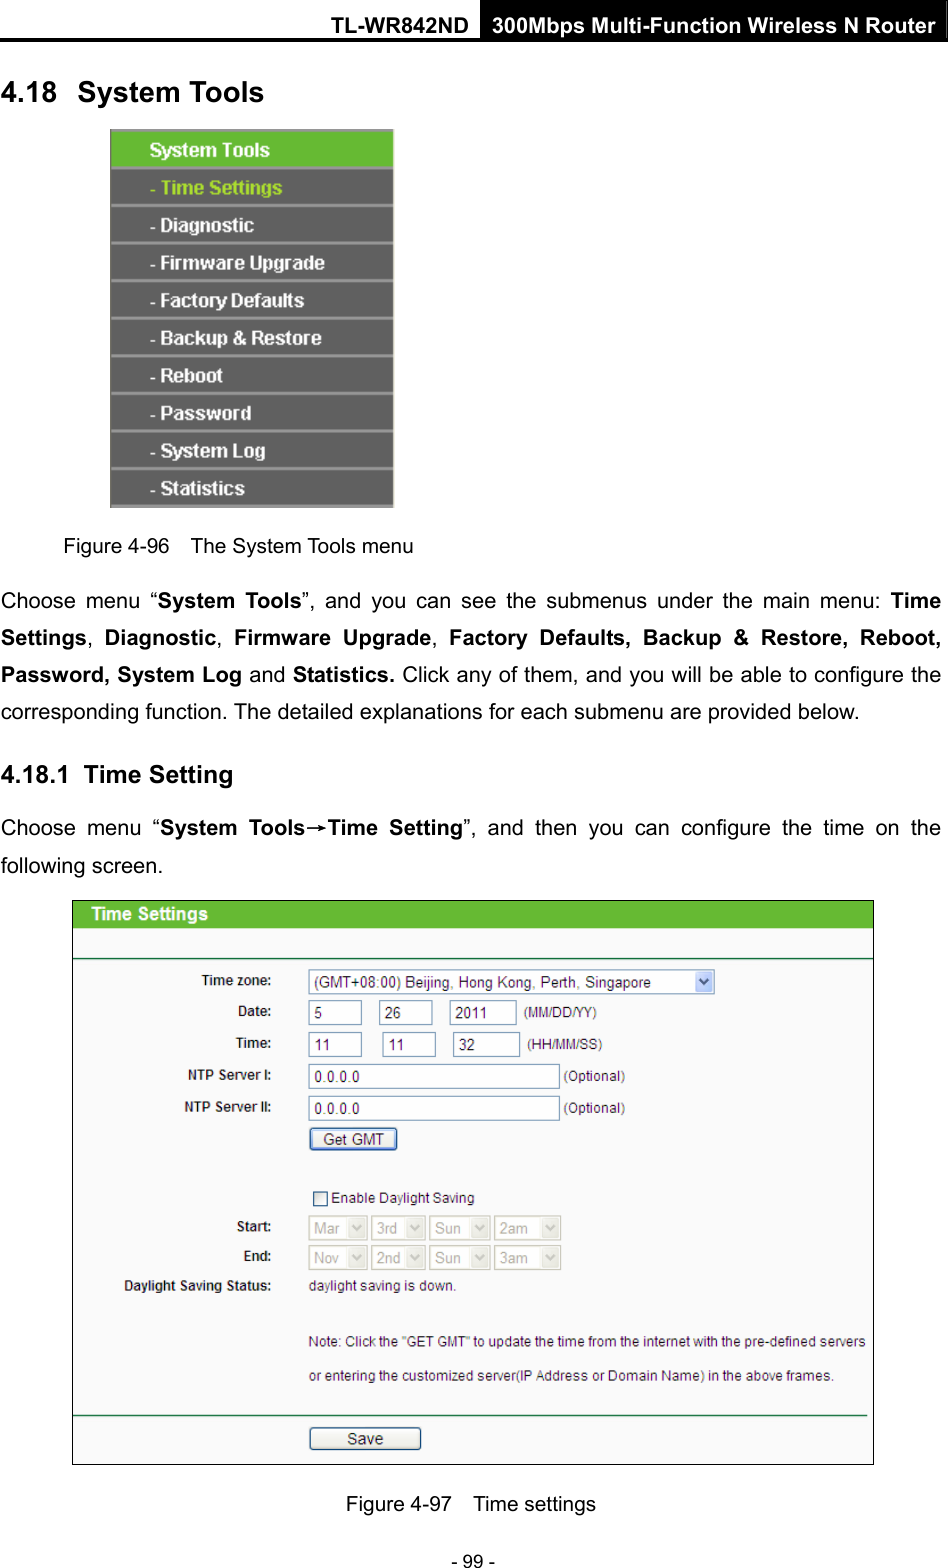 TL-WR842ND 300Mbps Multi-Function Wireless N Router - 99 - 4.18  System Tools  Figure 4-96    The System Tools menu Choose menu “System Tools”, and you can see the submenus under the main menu: Time Settings,  Diagnostic,  Firmware Upgrade,  Factory Defaults, Backup &amp; Restore, Reboot, Password, System Log and Statistics. Click any of them, and you will be able to configure the corresponding function. The detailed explanations for each submenu are provided below. 4.18.1  Time Setting Choose menu “System Tools→Time Setting”, and then you can configure the time on the following screen.  Figure 4-97  Time settings 